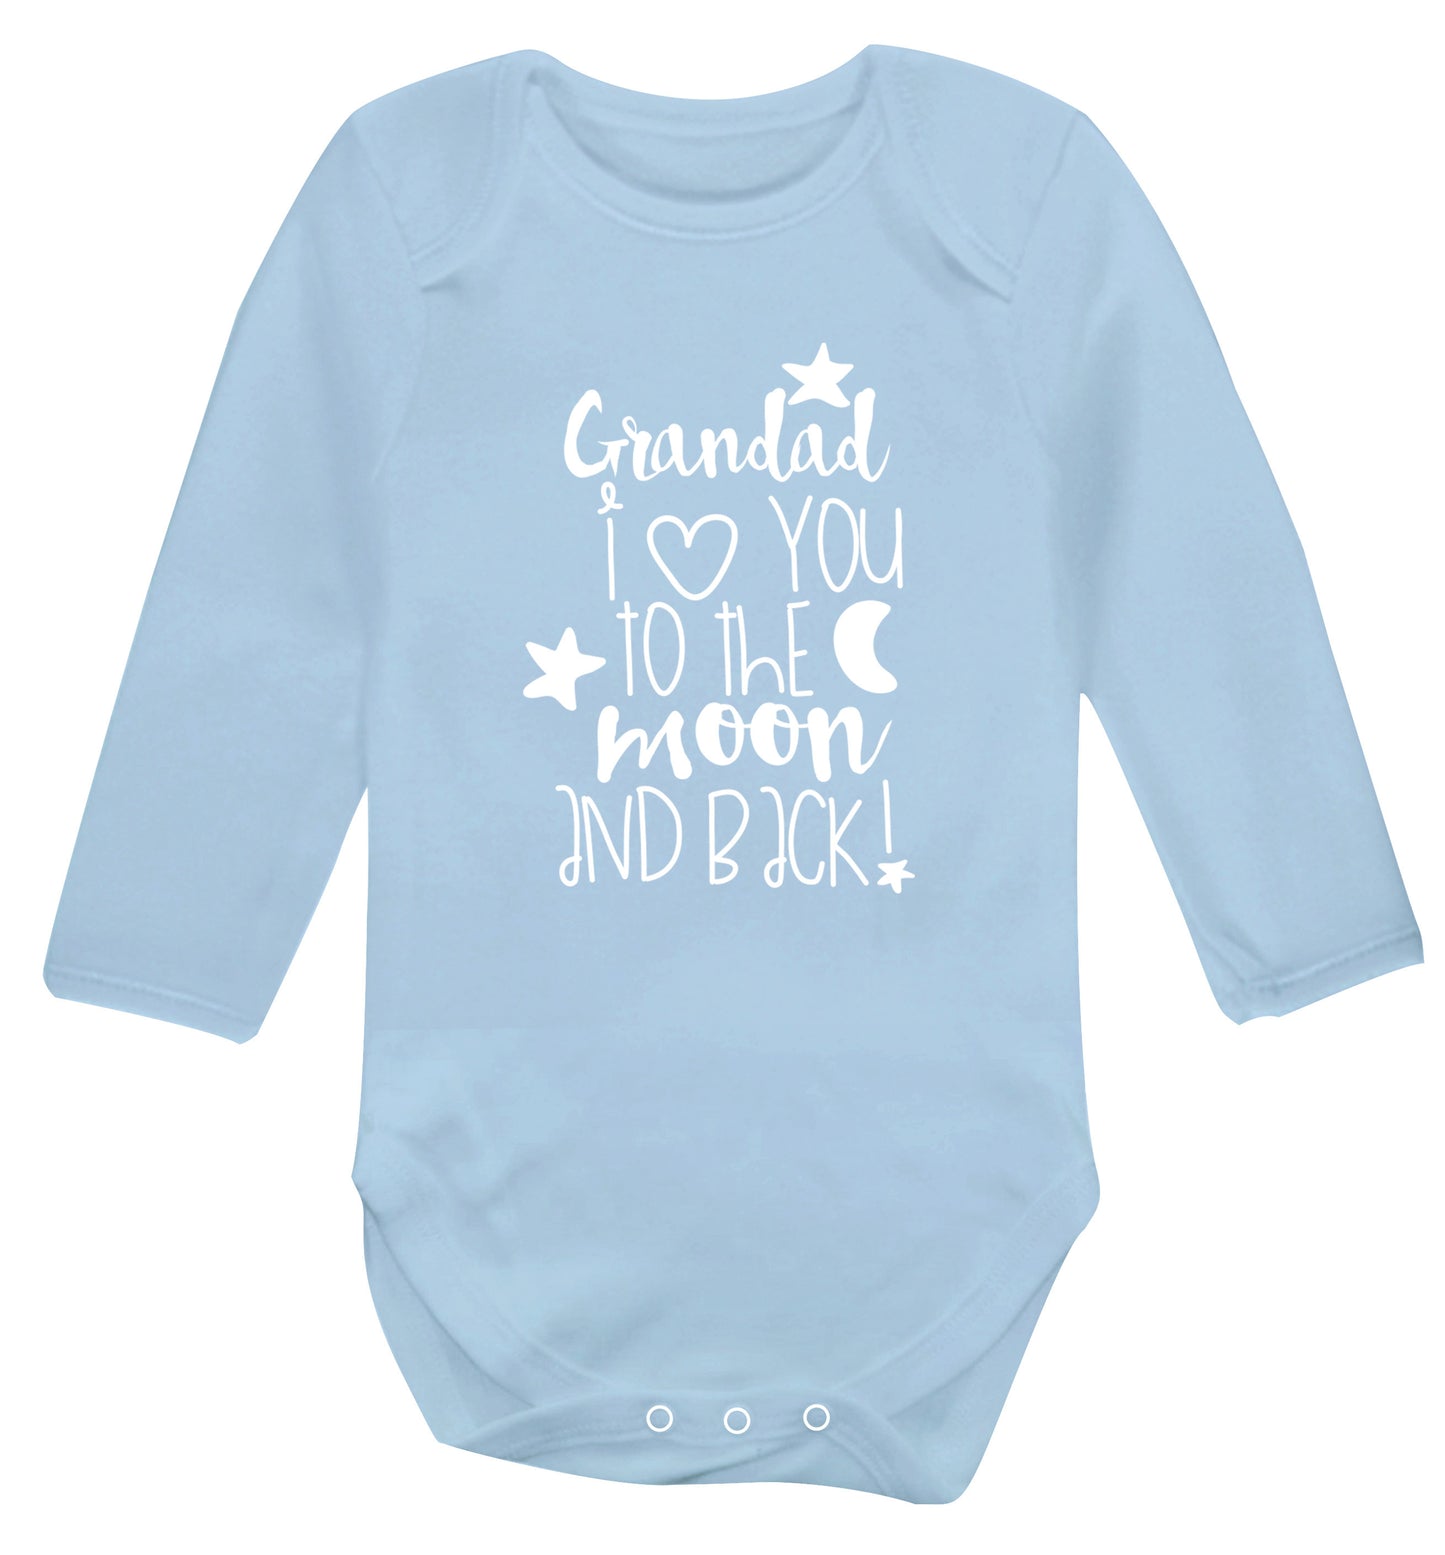 Grandad's I love you to the moon and back Baby Vest long sleeved pale blue 6-12 months